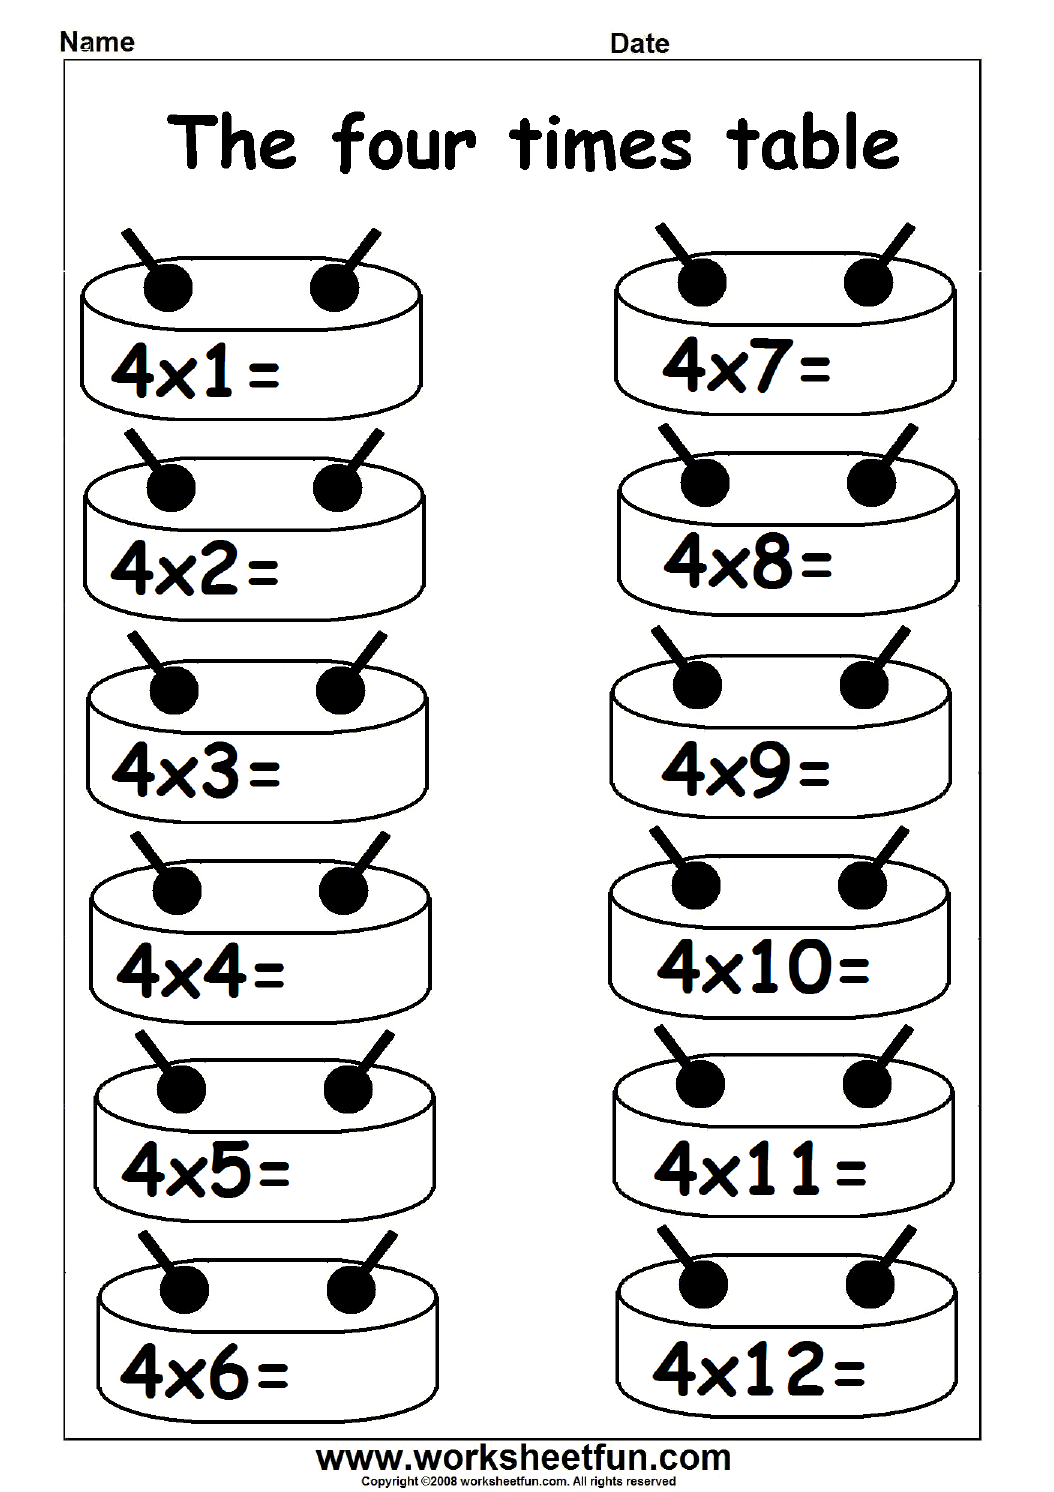 multiplication-times-tables-worksheets-2-3-4-6-7-8-9-12-13-14-and-16-times-tables